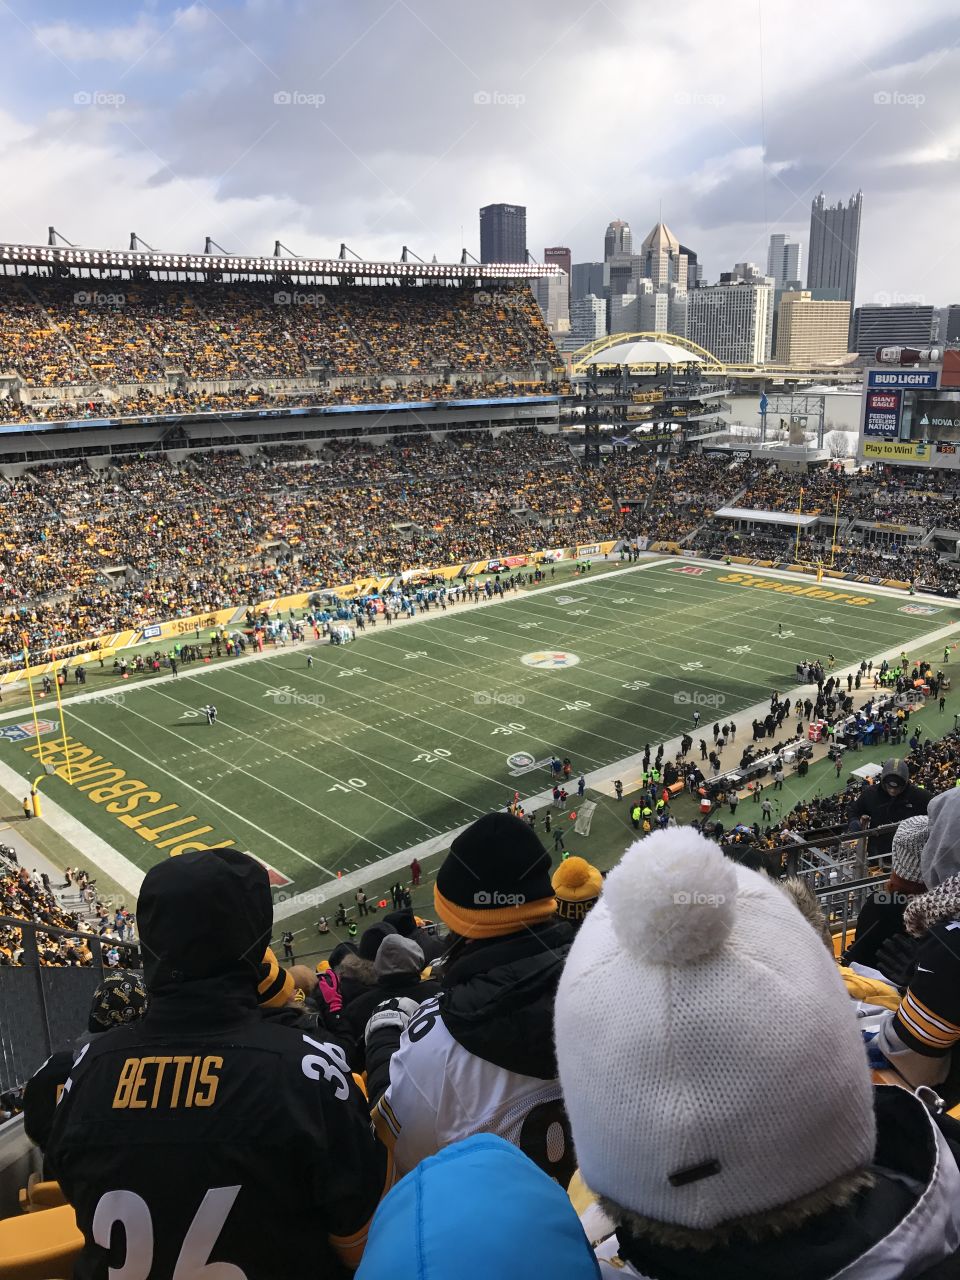 Let's go Steelers!